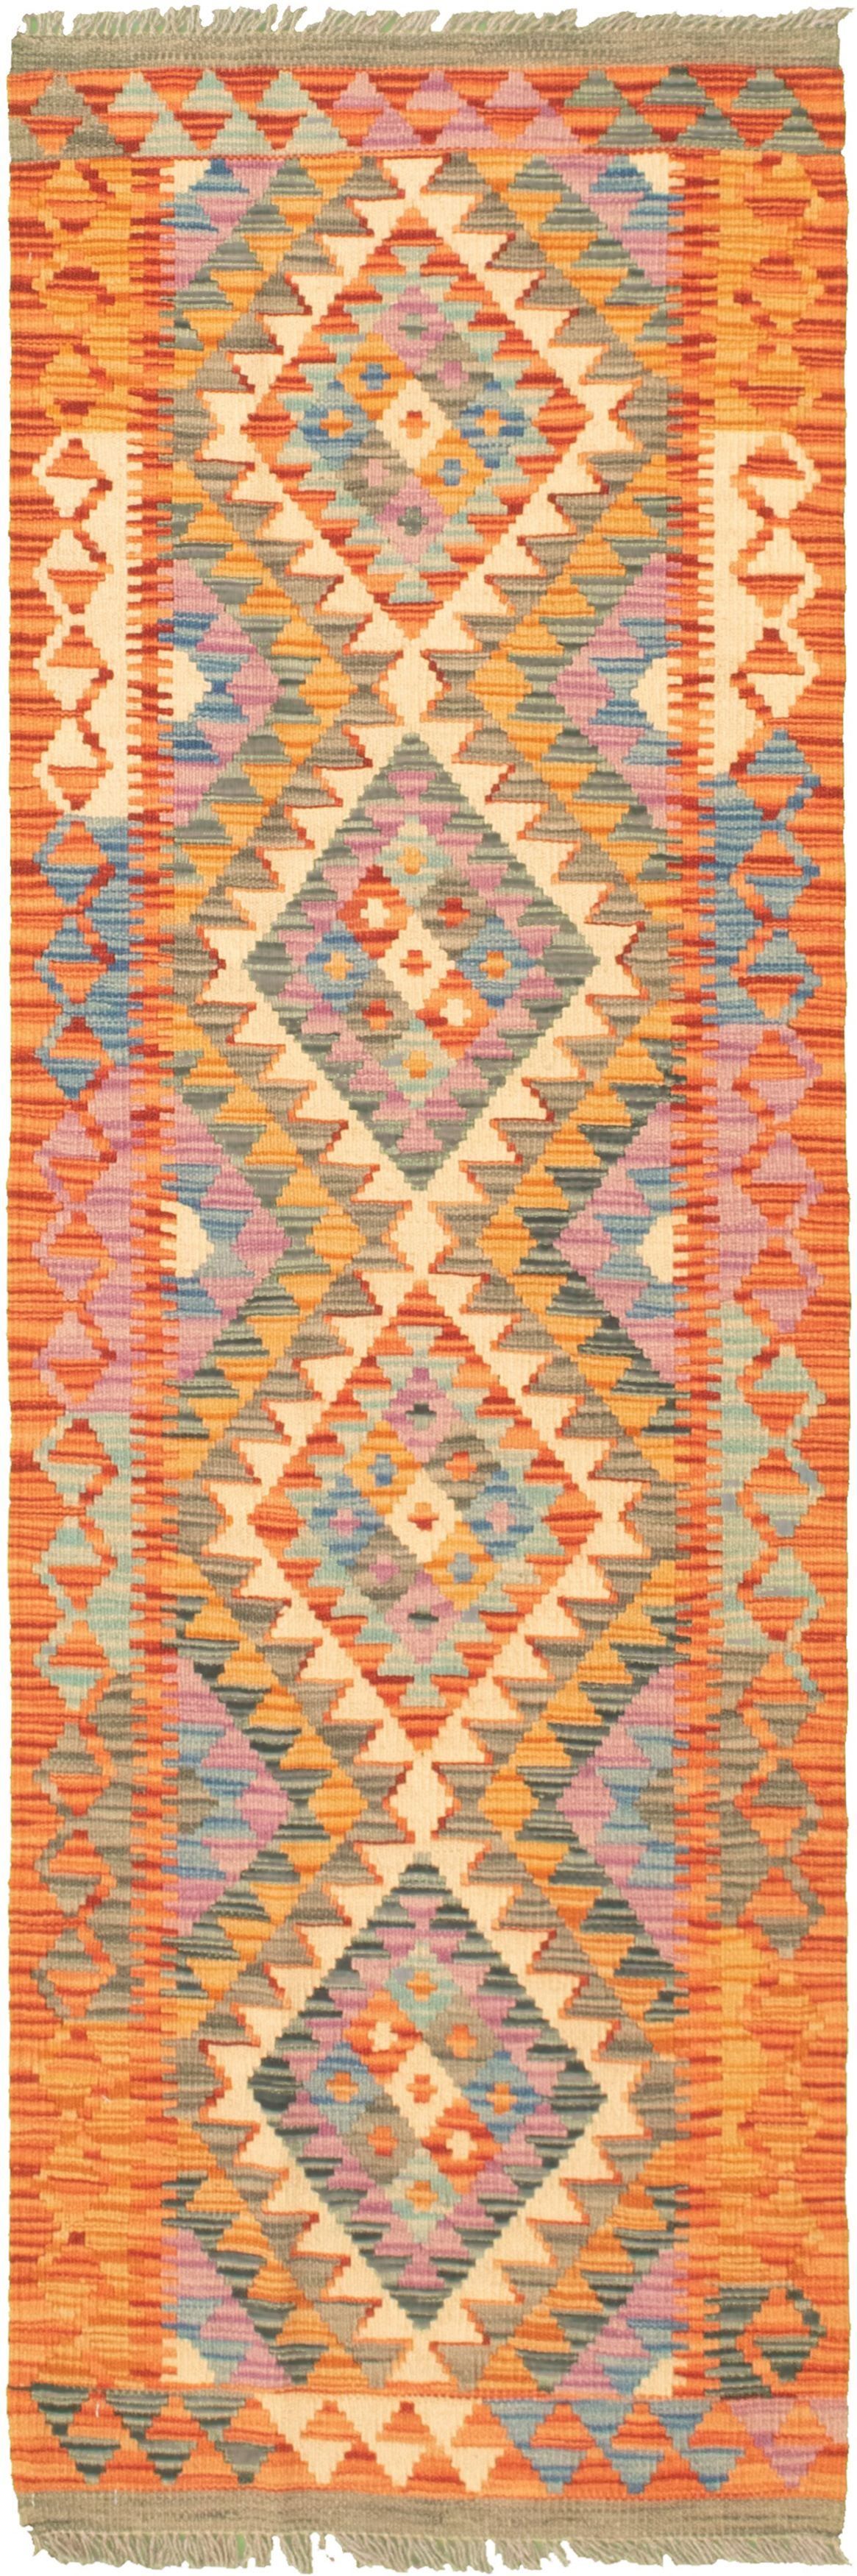 Hand woven Bold and Colorful  Cream Wool Kilim 2'0" x 6'7"  Size: 2'0" x 6'7"  